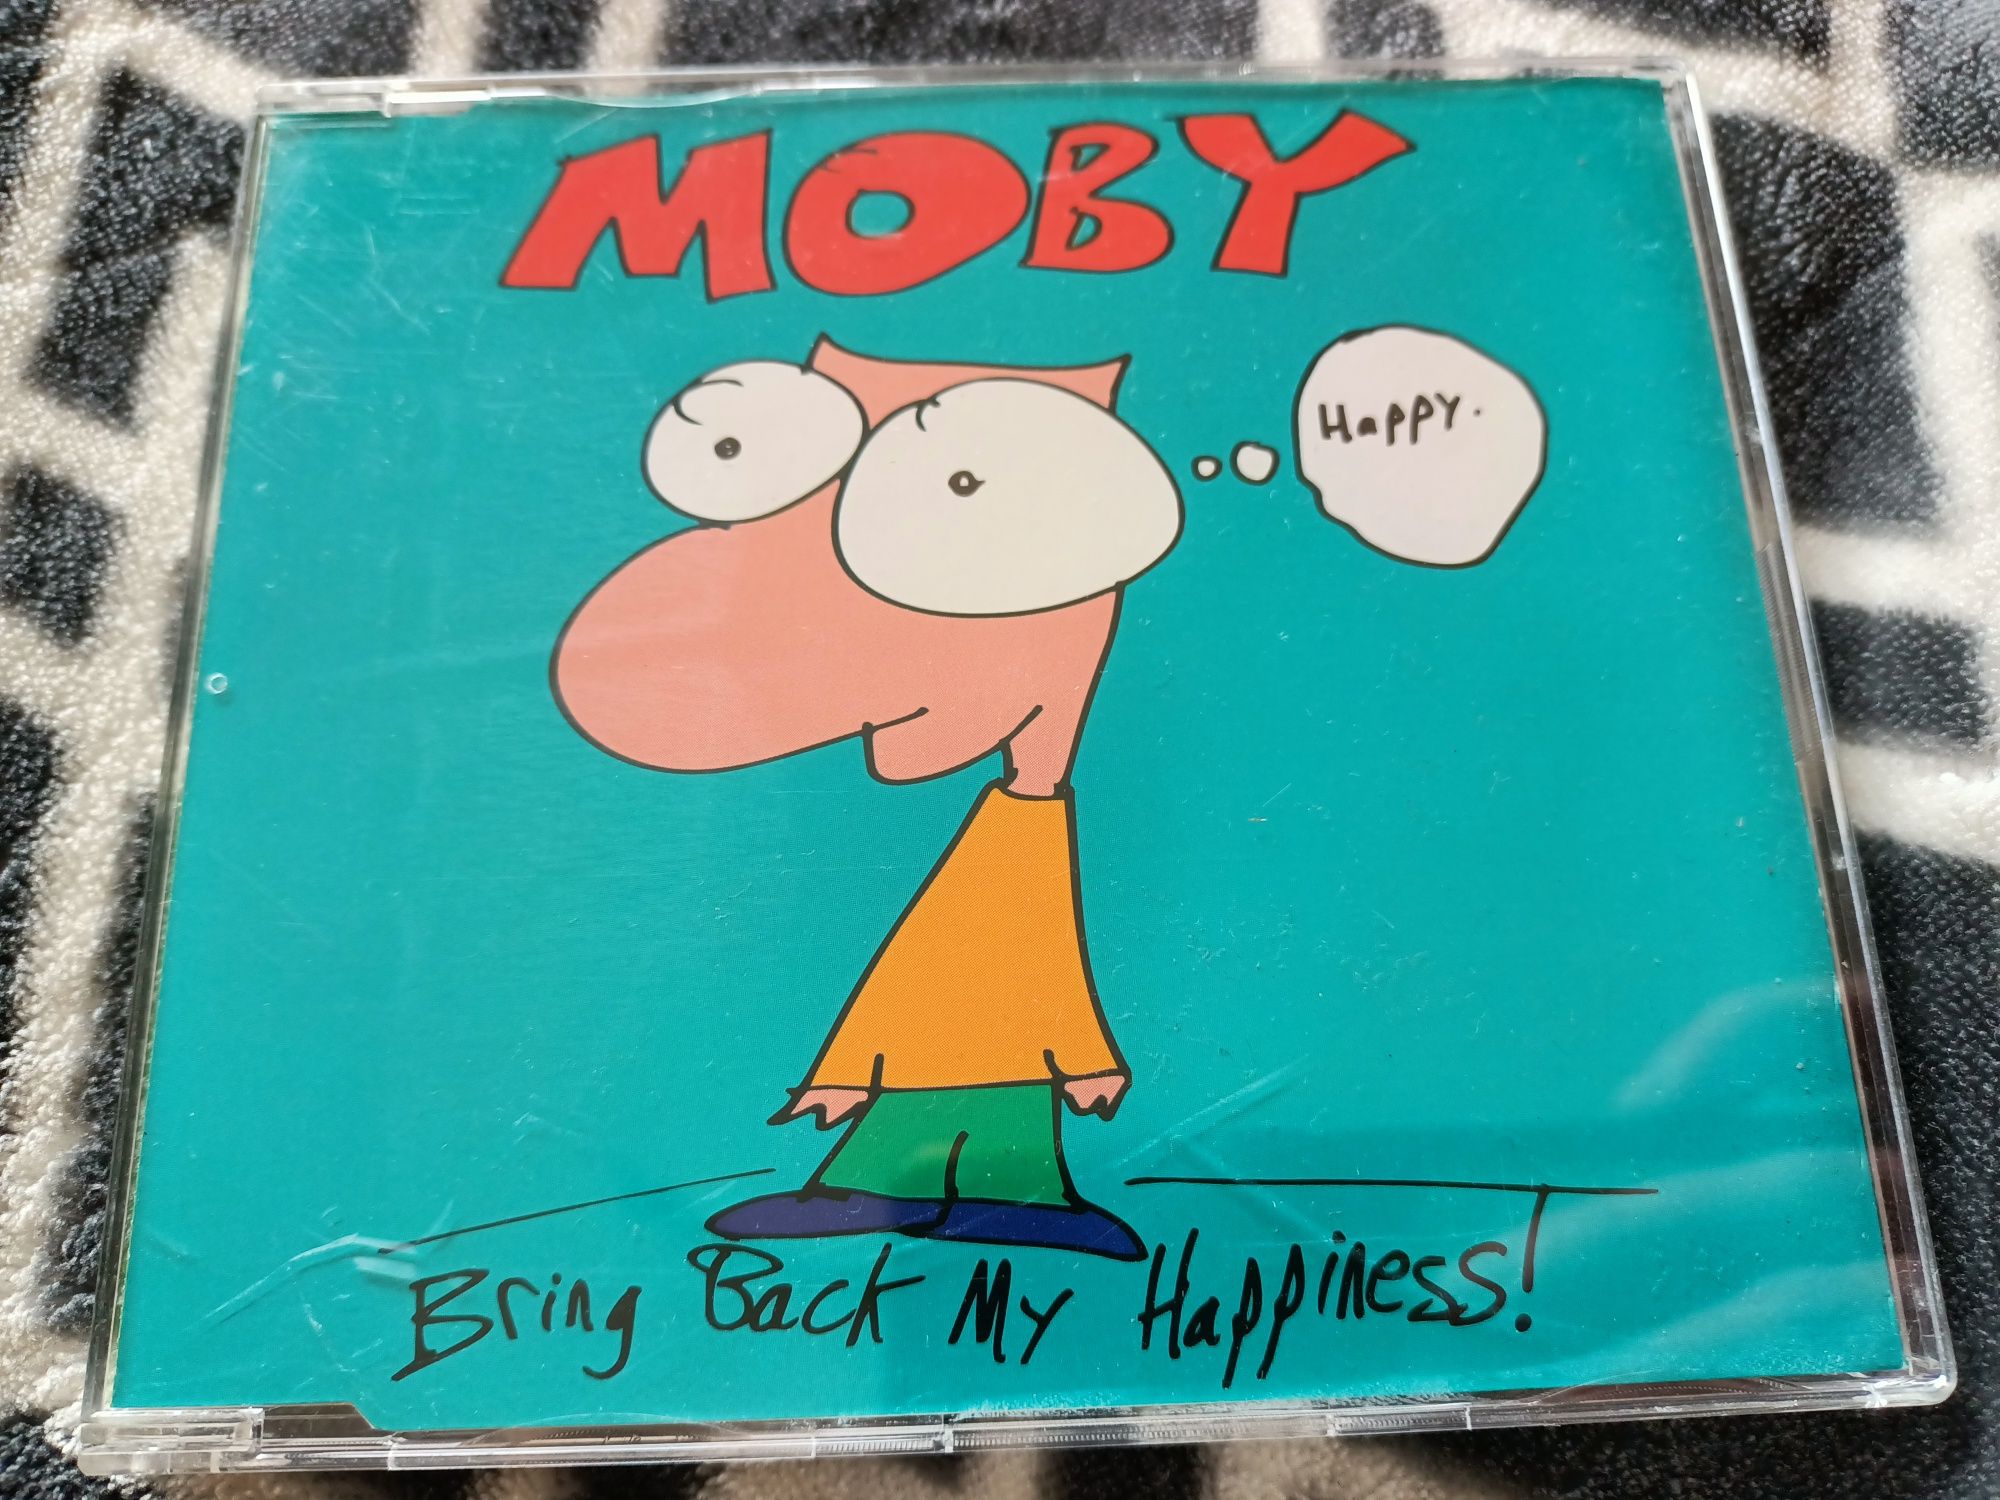 Moby - Bring Back My Happiness! (CD, Single)(nm)